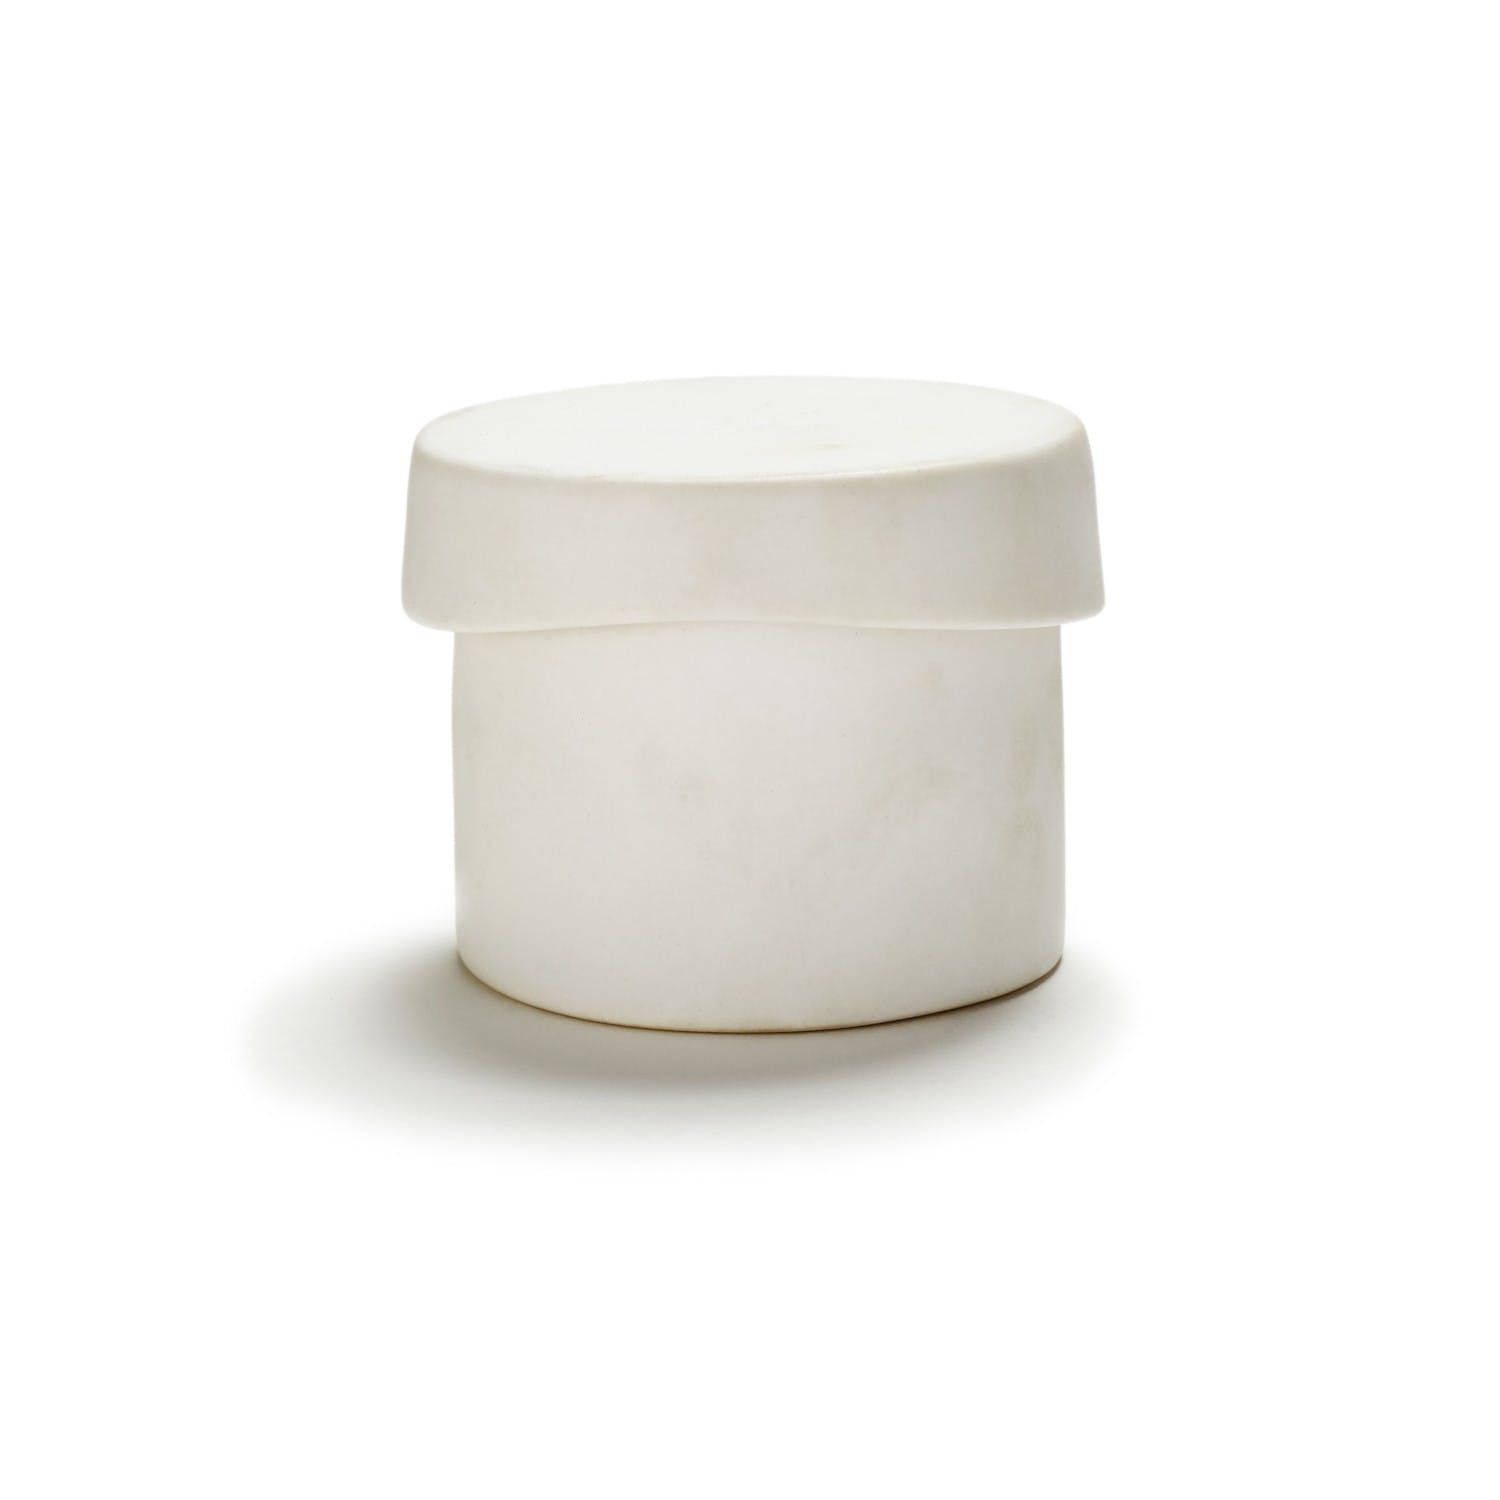 Minimalistic white container with secure lid, photographed on flat surface.